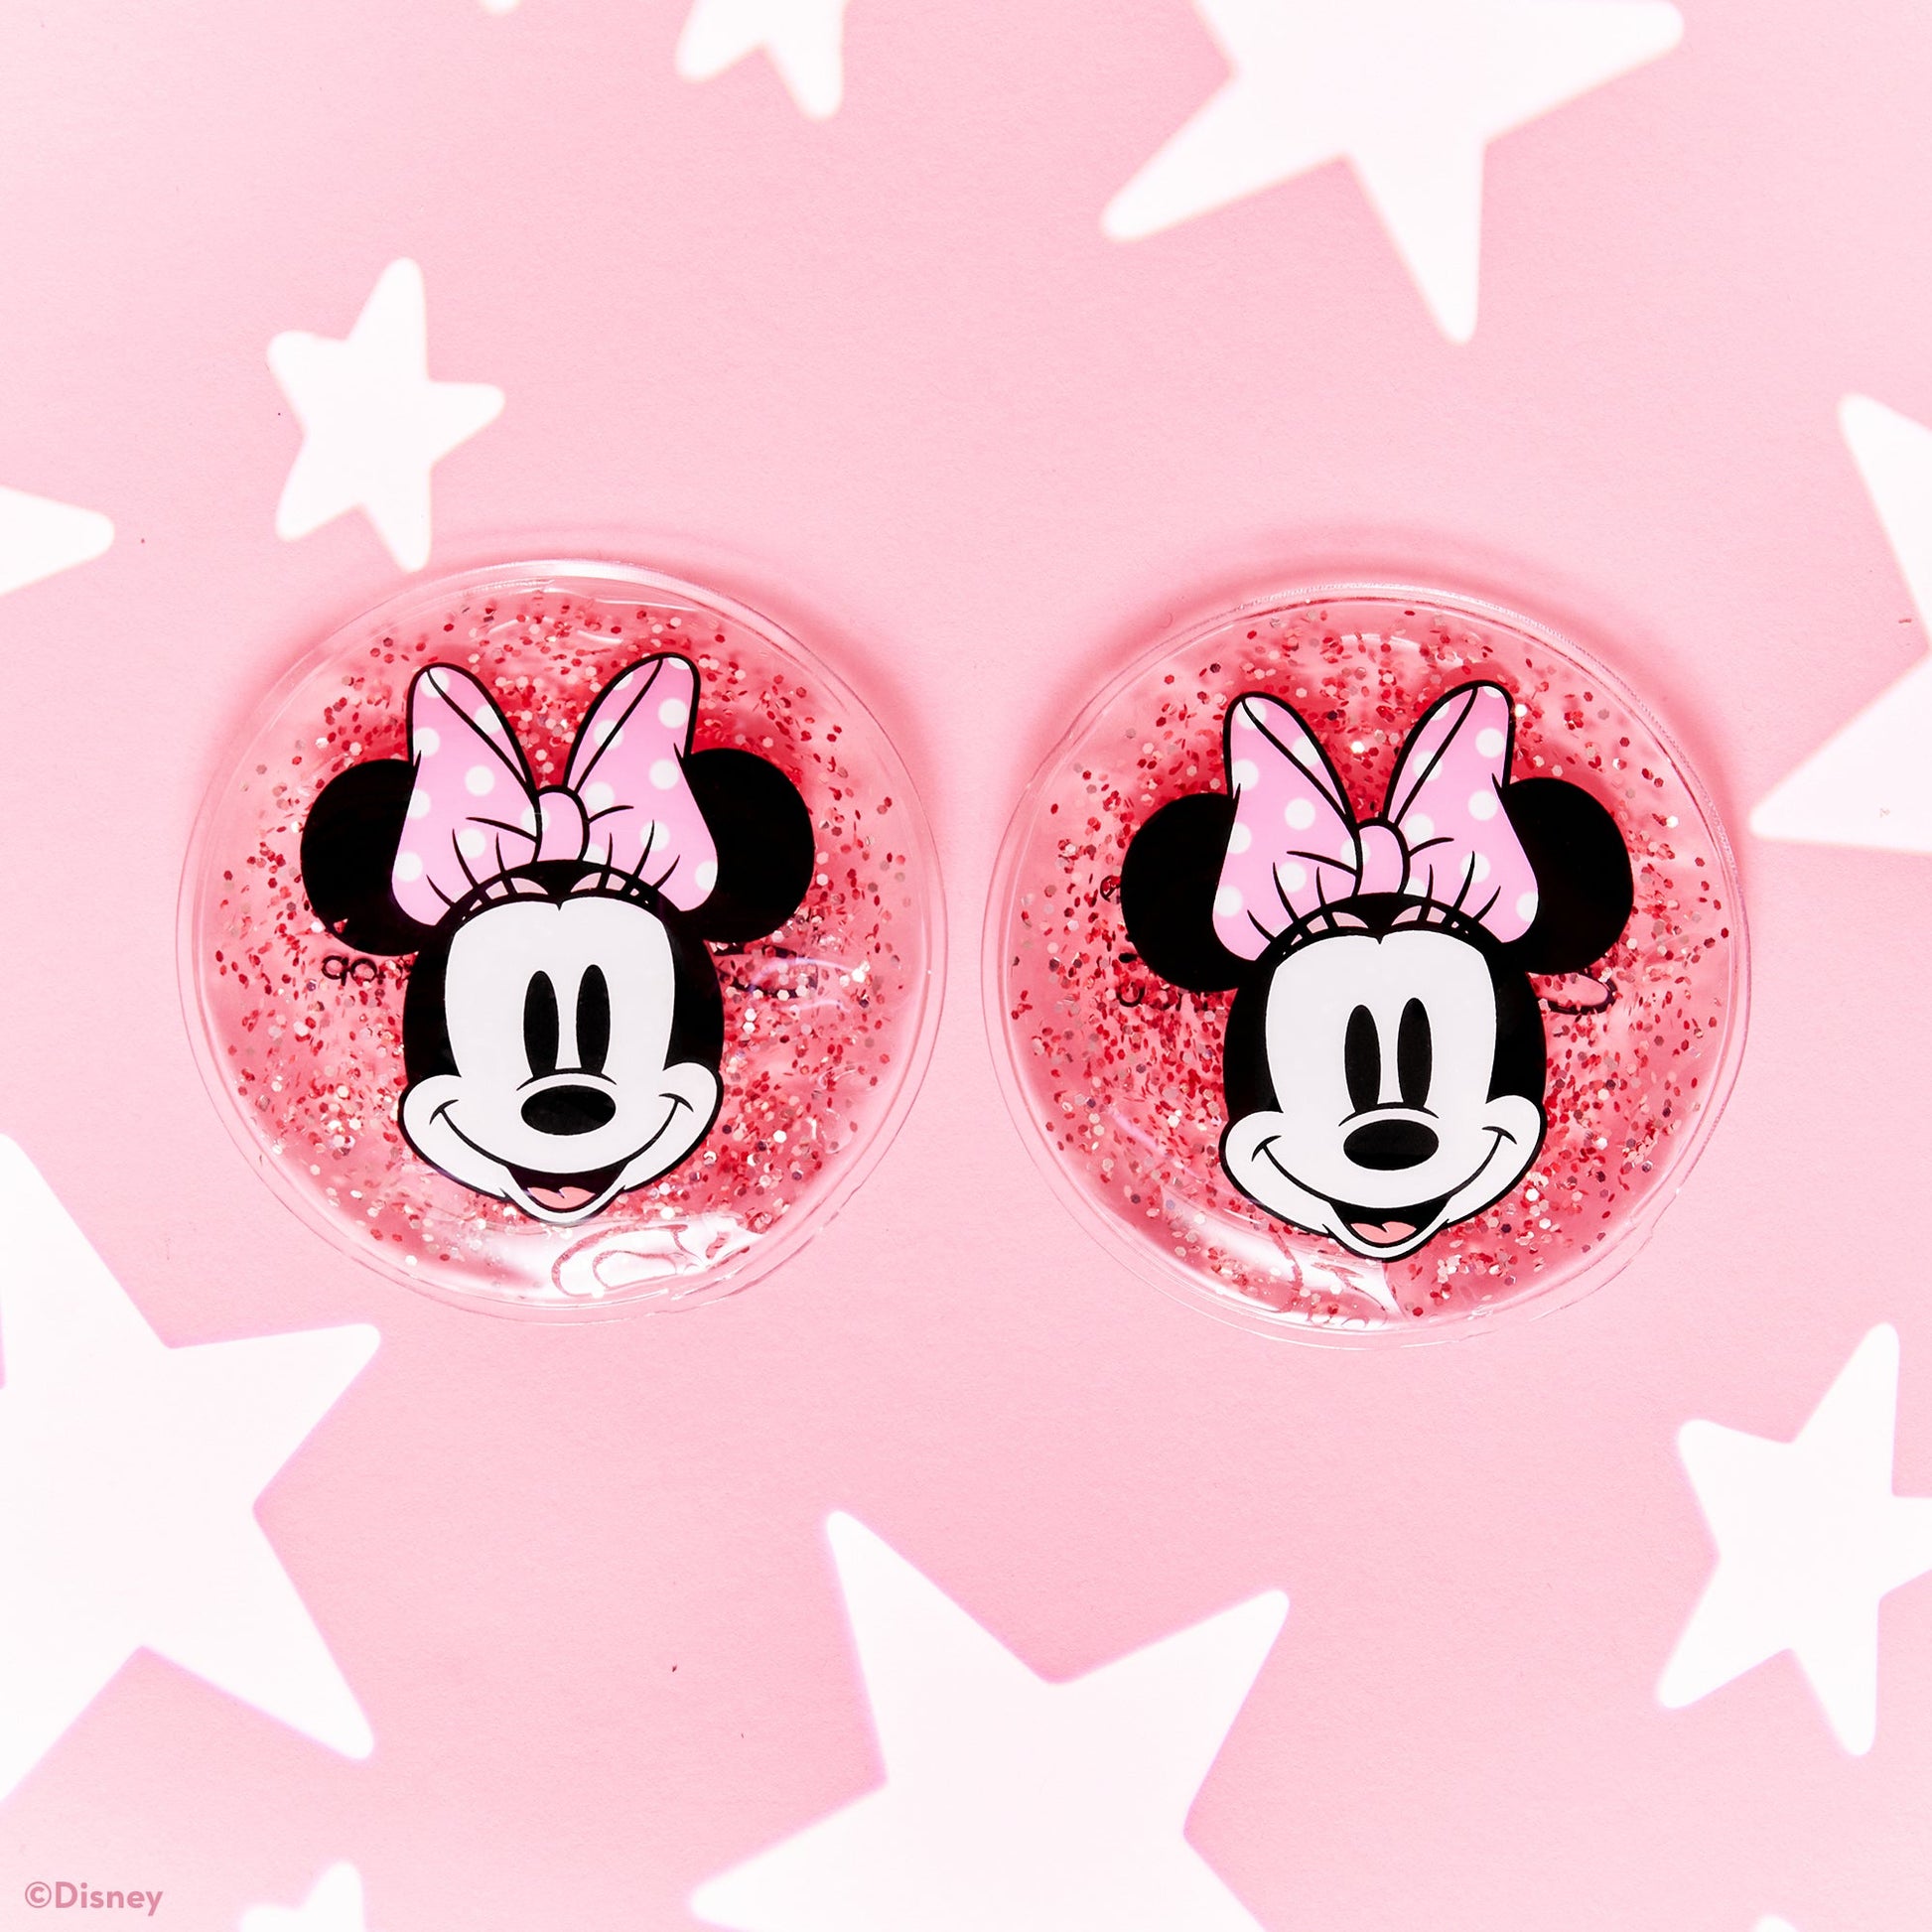 Minnie Mouse Patch -  Israel